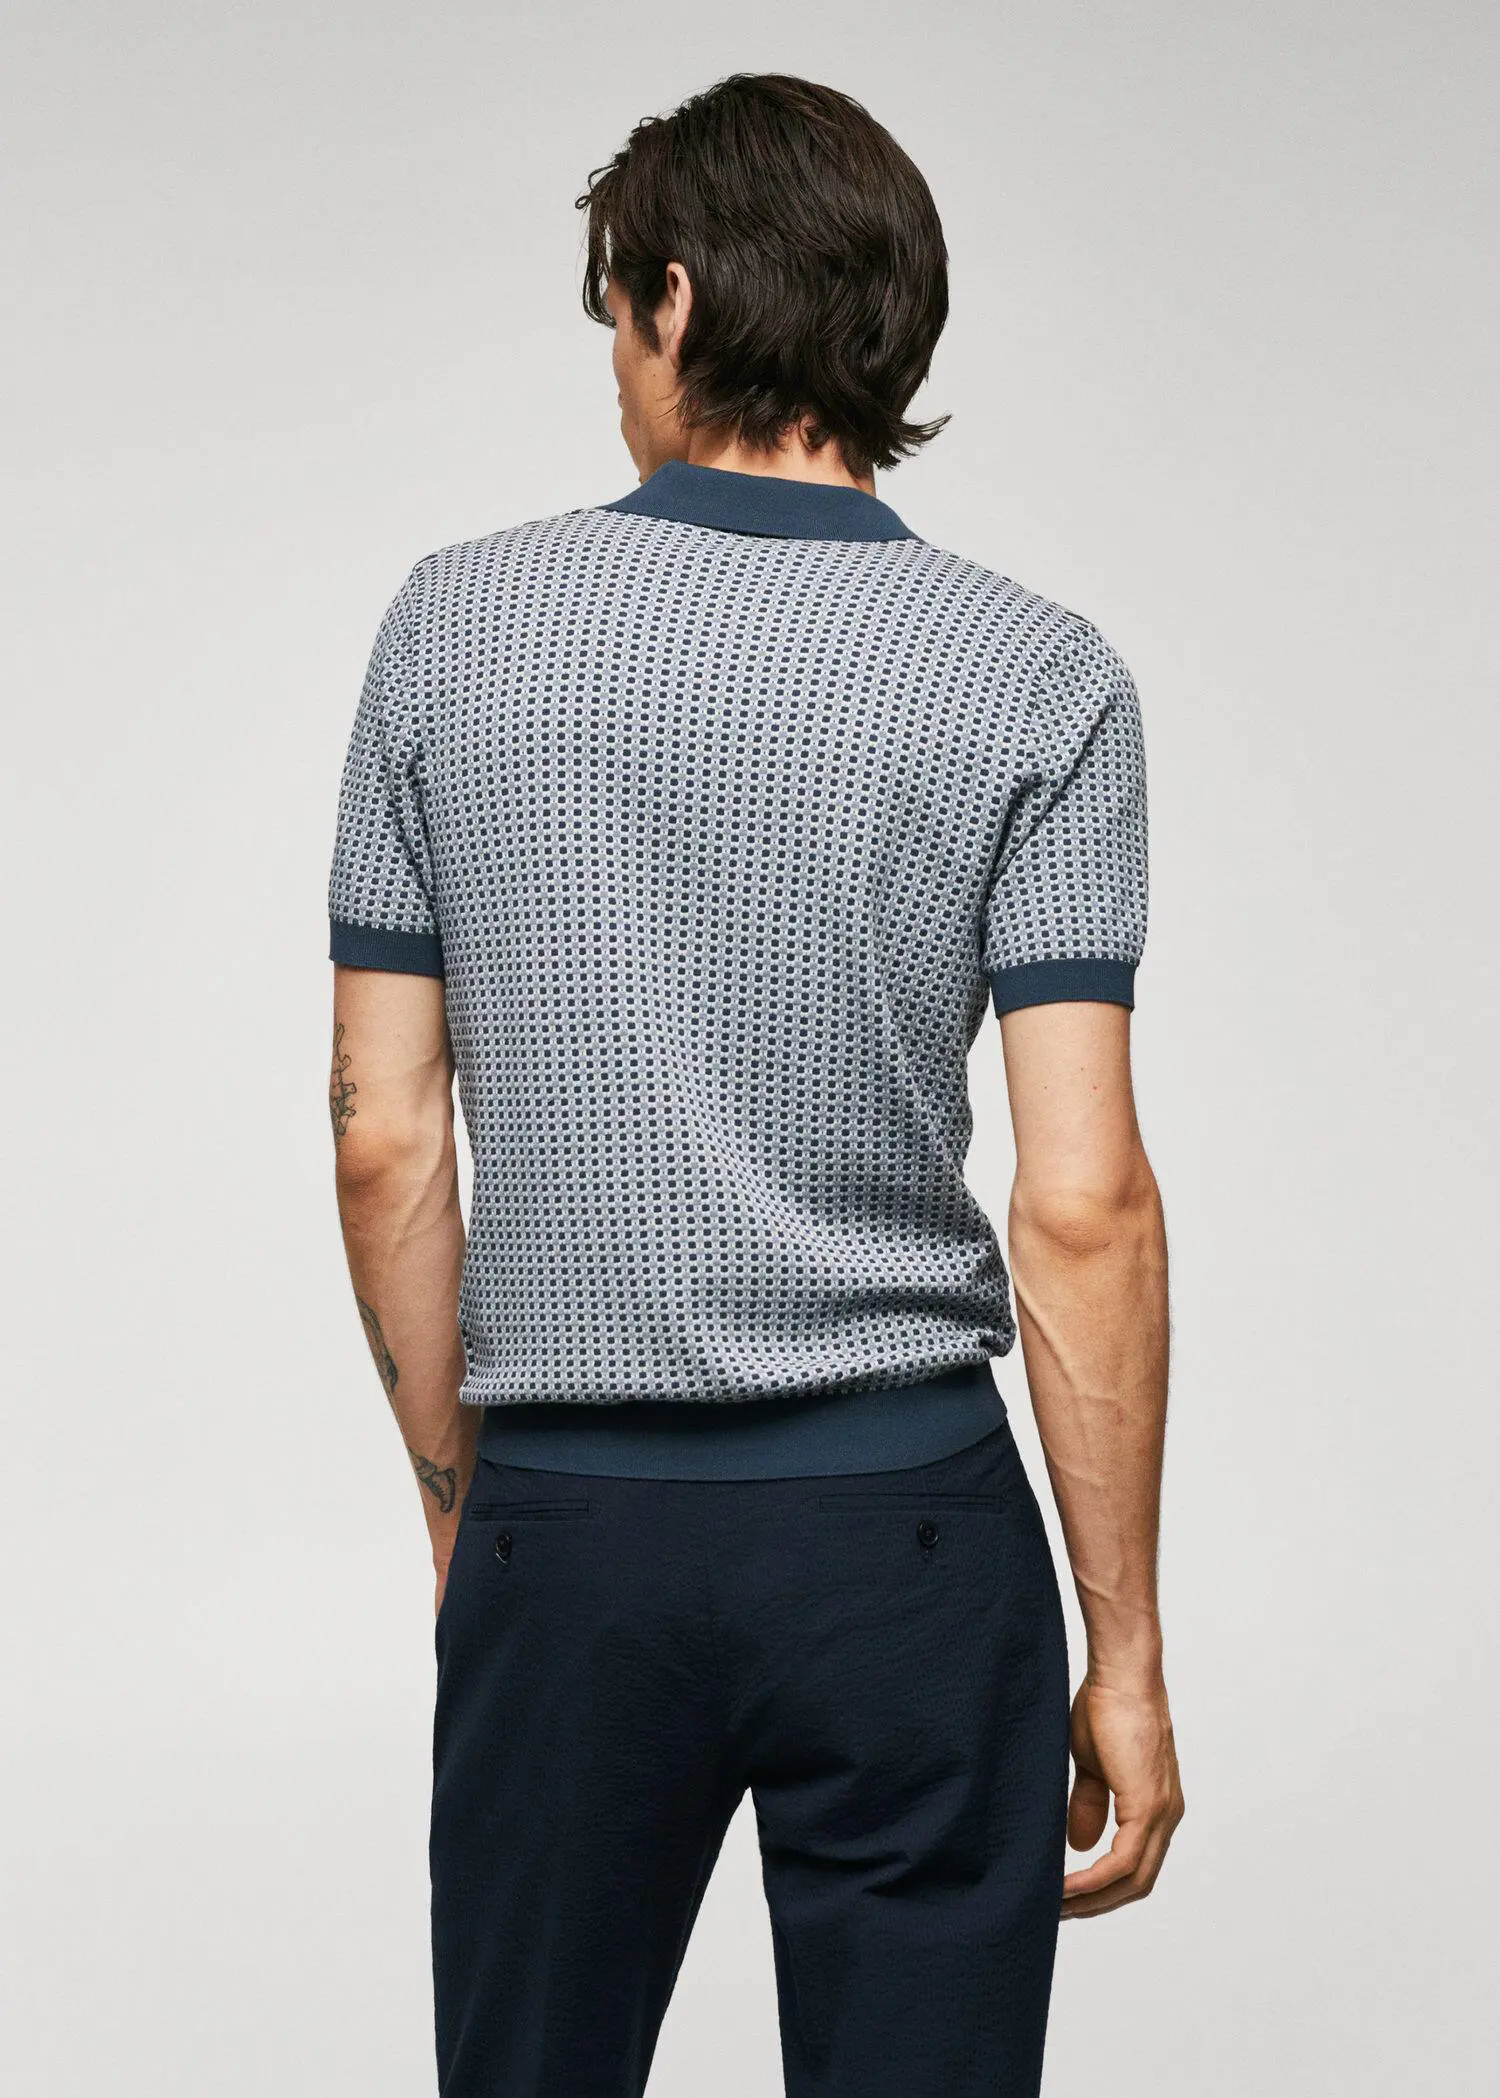 Mango Fine-knit polo shirt with geometric structure. a man wearing a blue and white patterned shirt. 